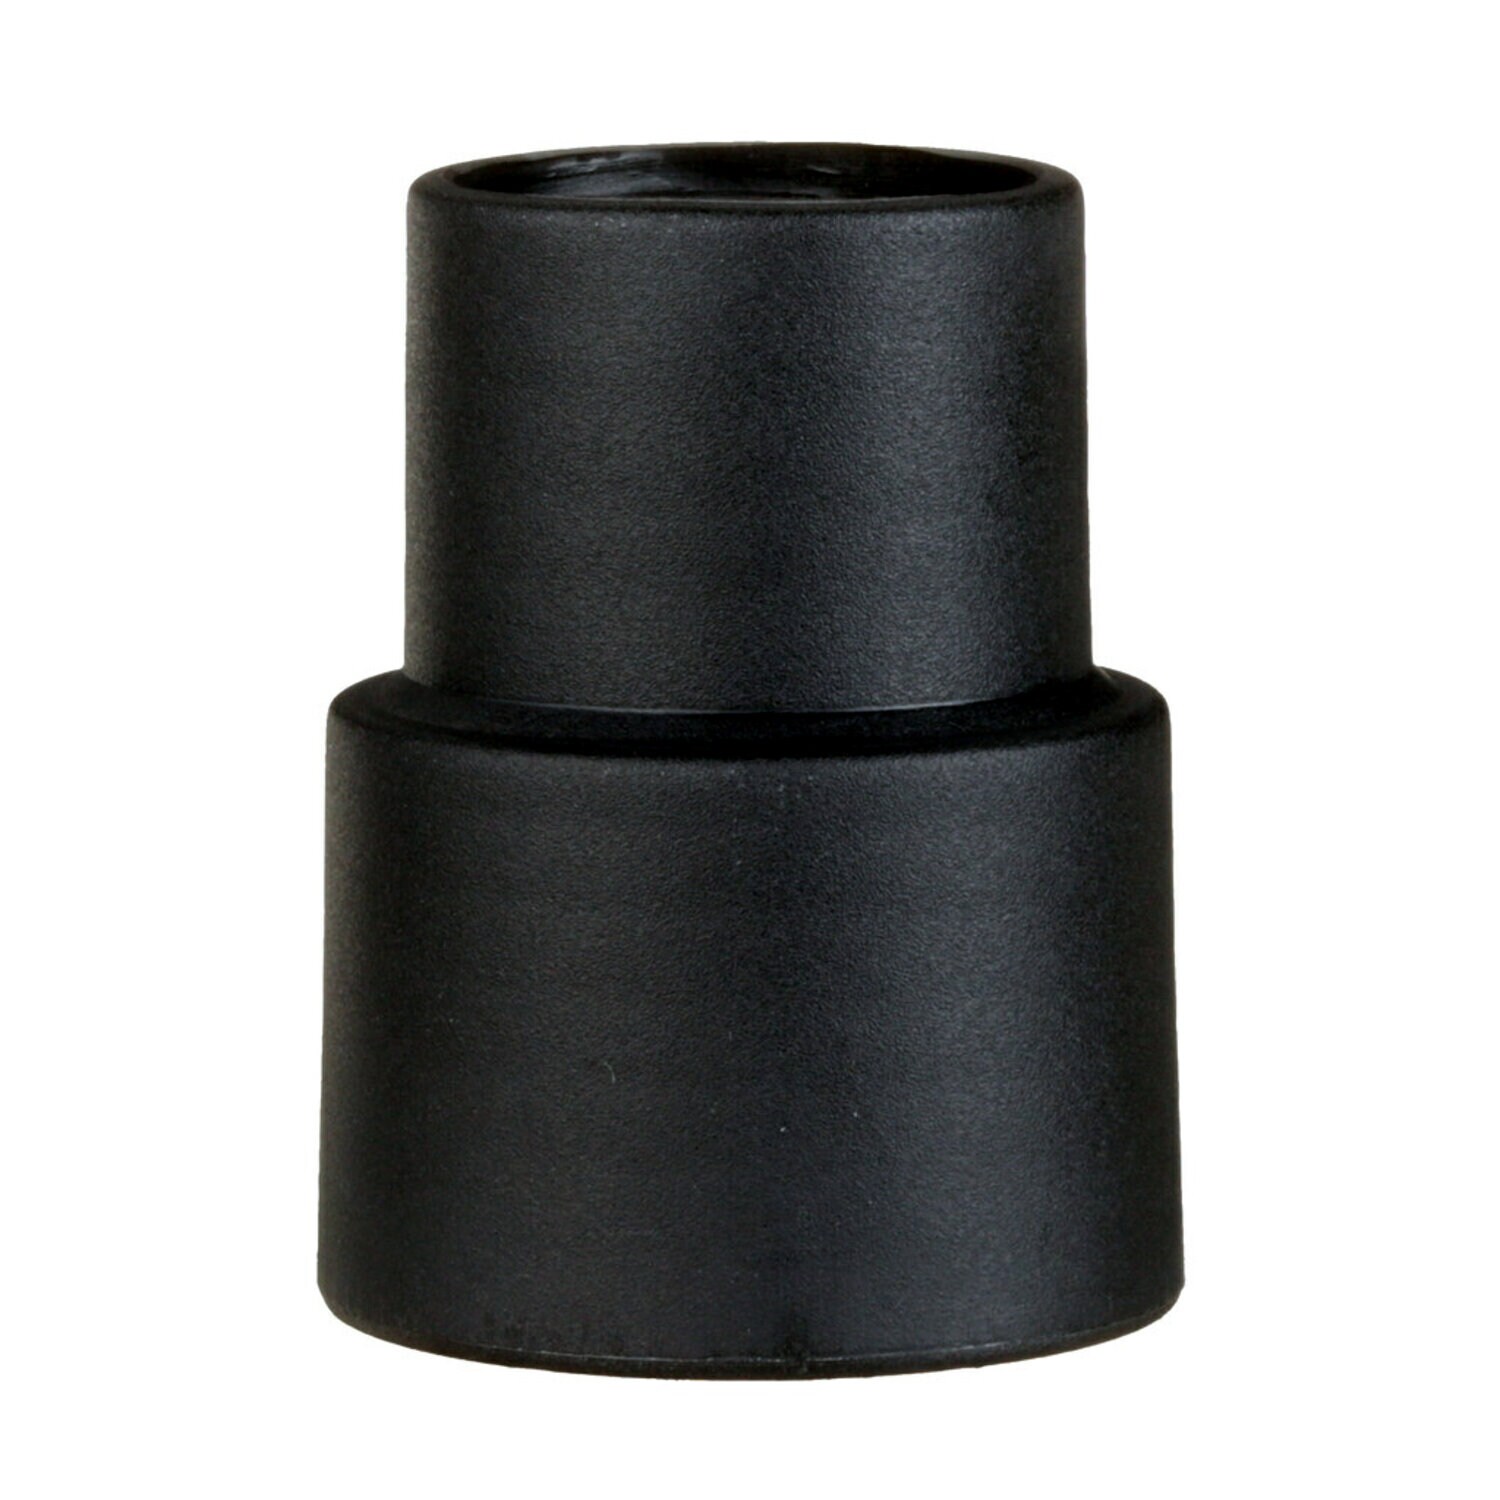 7000045309 - 3M Vacuum Hose End Adapter 30324, 3/4 in to 1 in Hose Thread